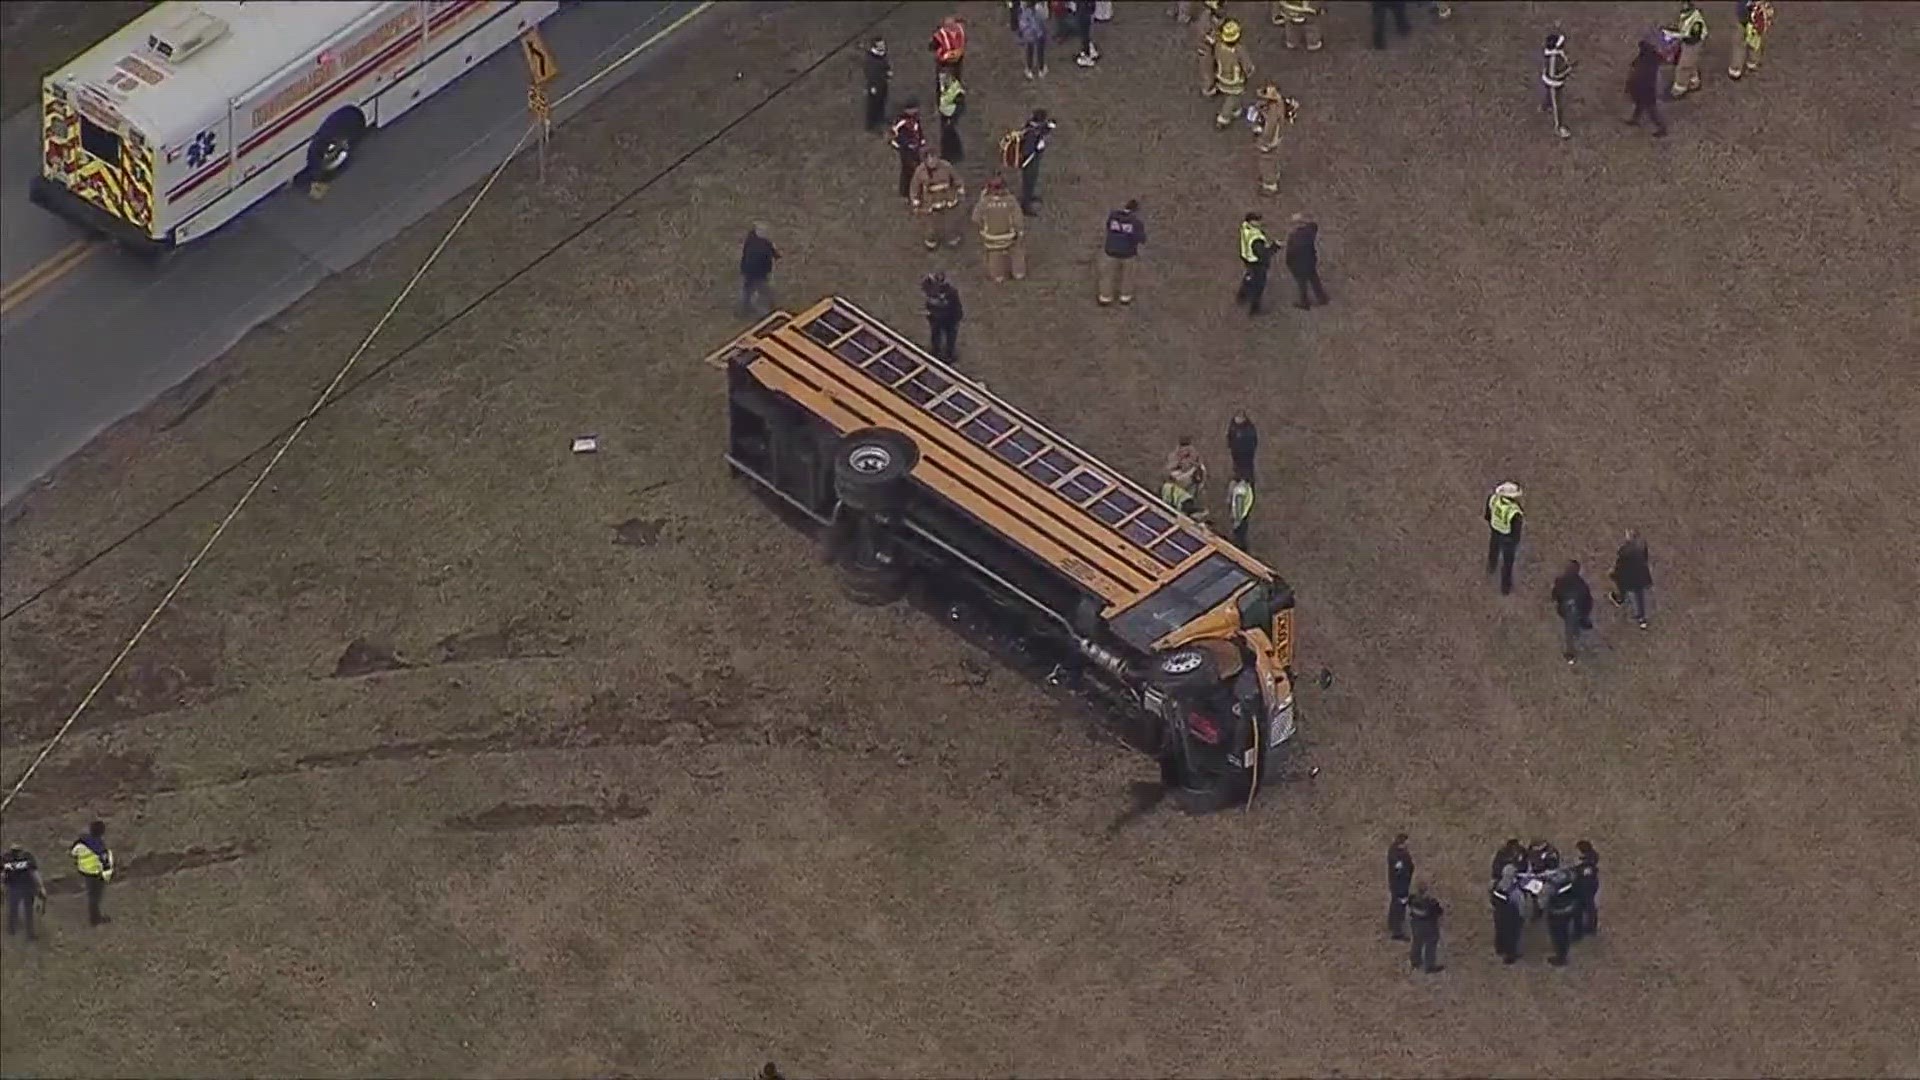 Several students from Hammond Middle School are being evaluated for injuries after a school bus crash in Columbia.